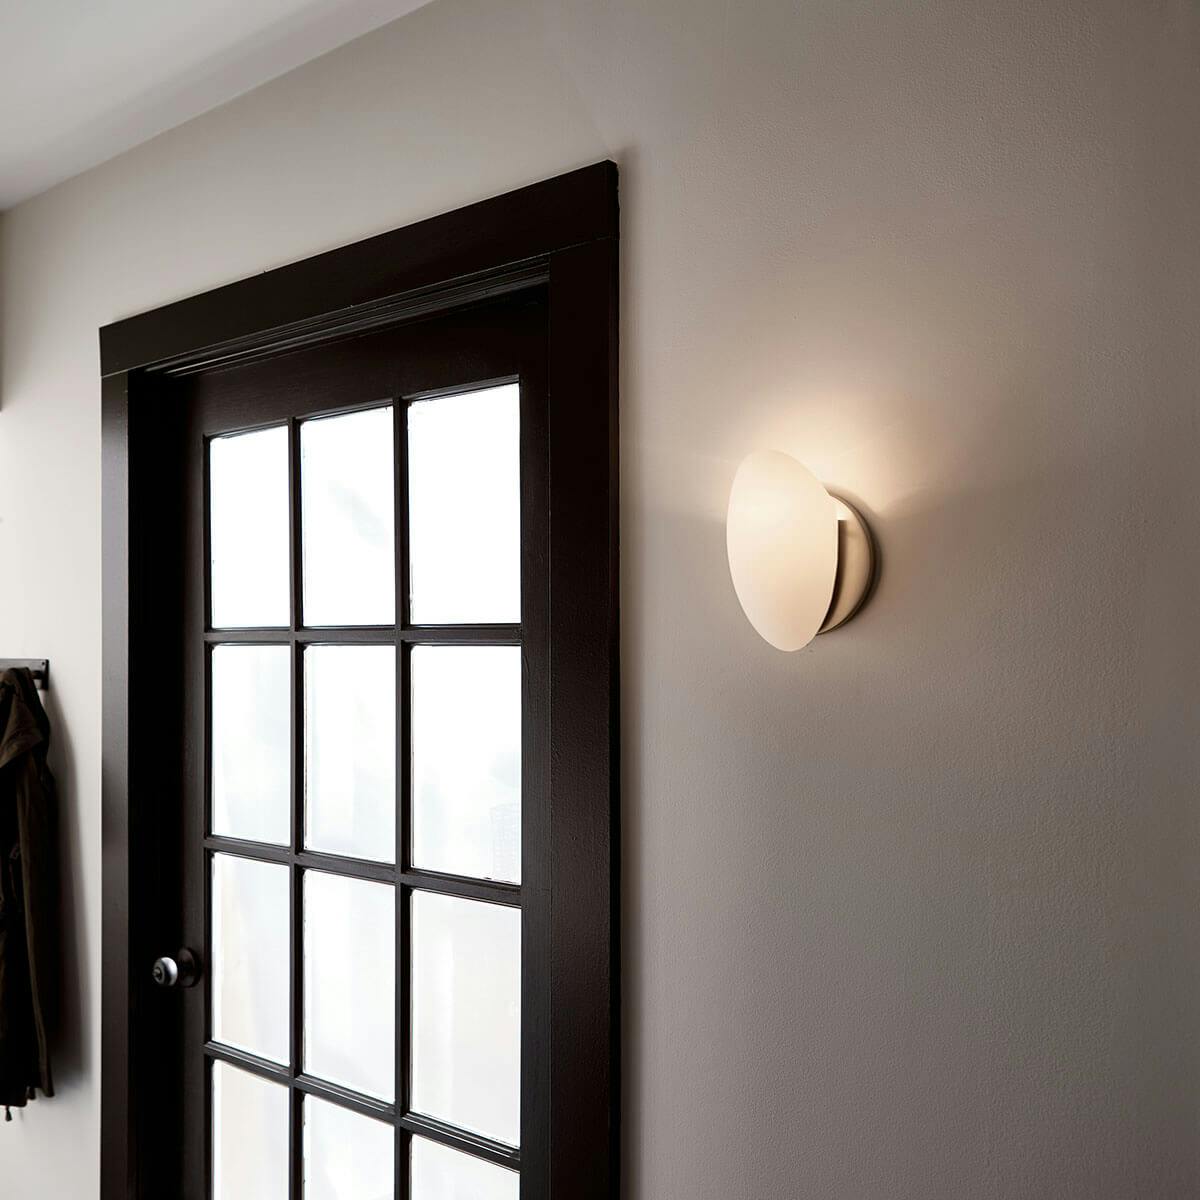 Day time mudroom image featuring Swiss Passport wall sconce 6520NI